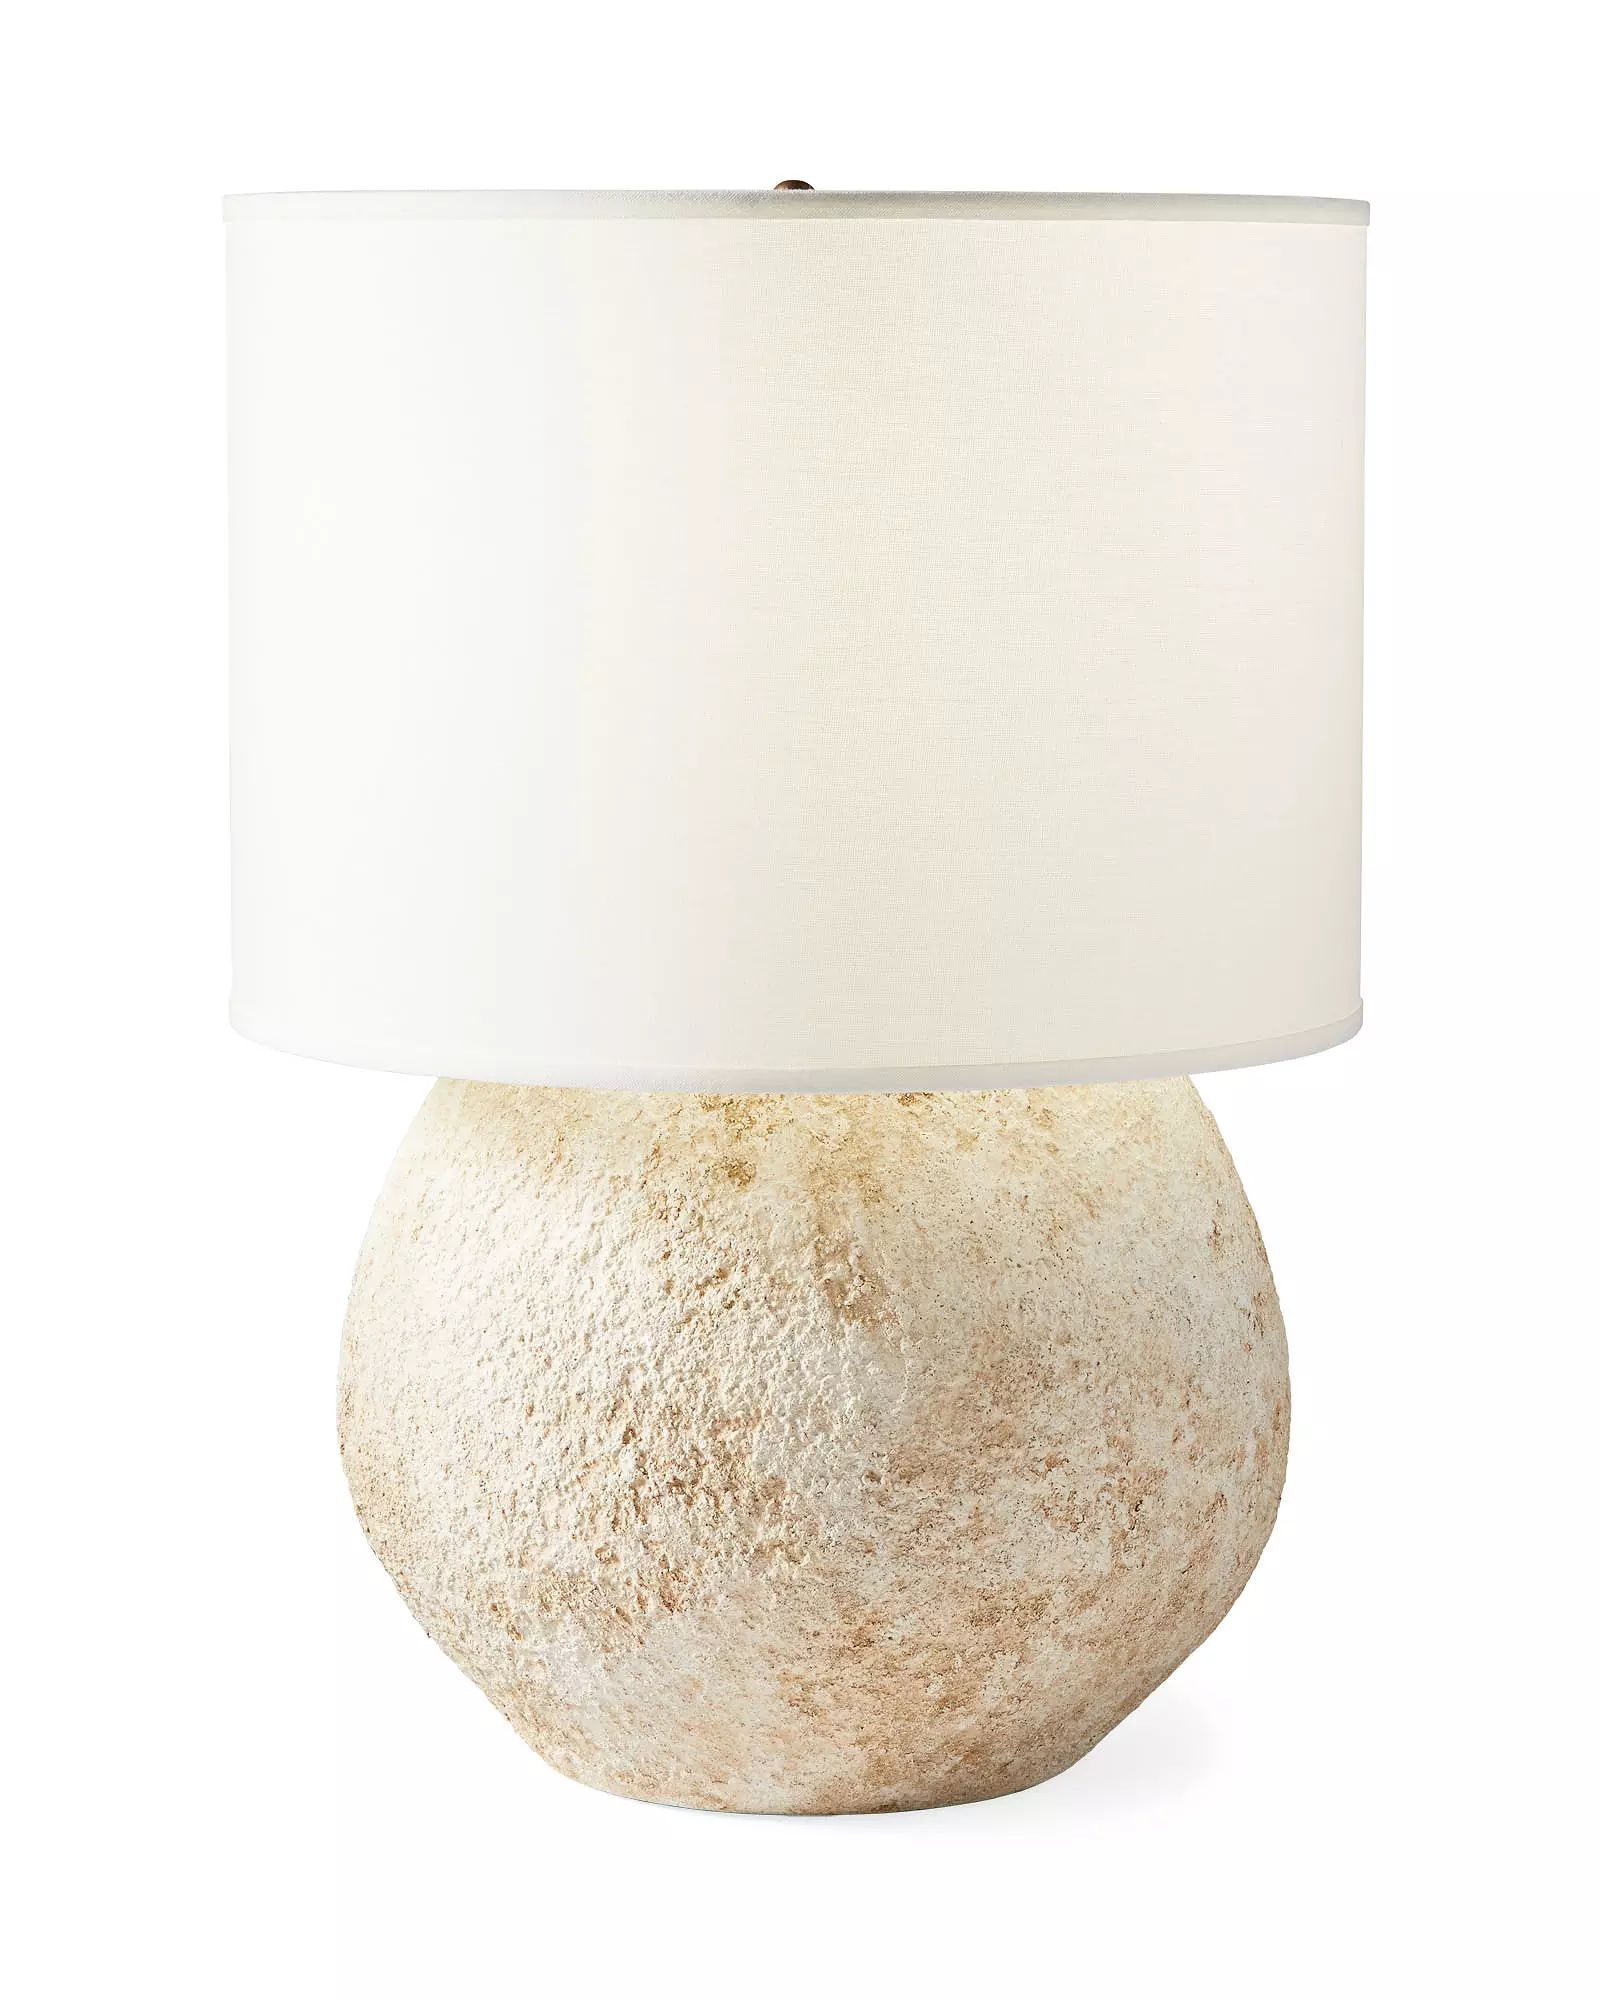 Kehoe Beach Table Lamp | Serena and Lily